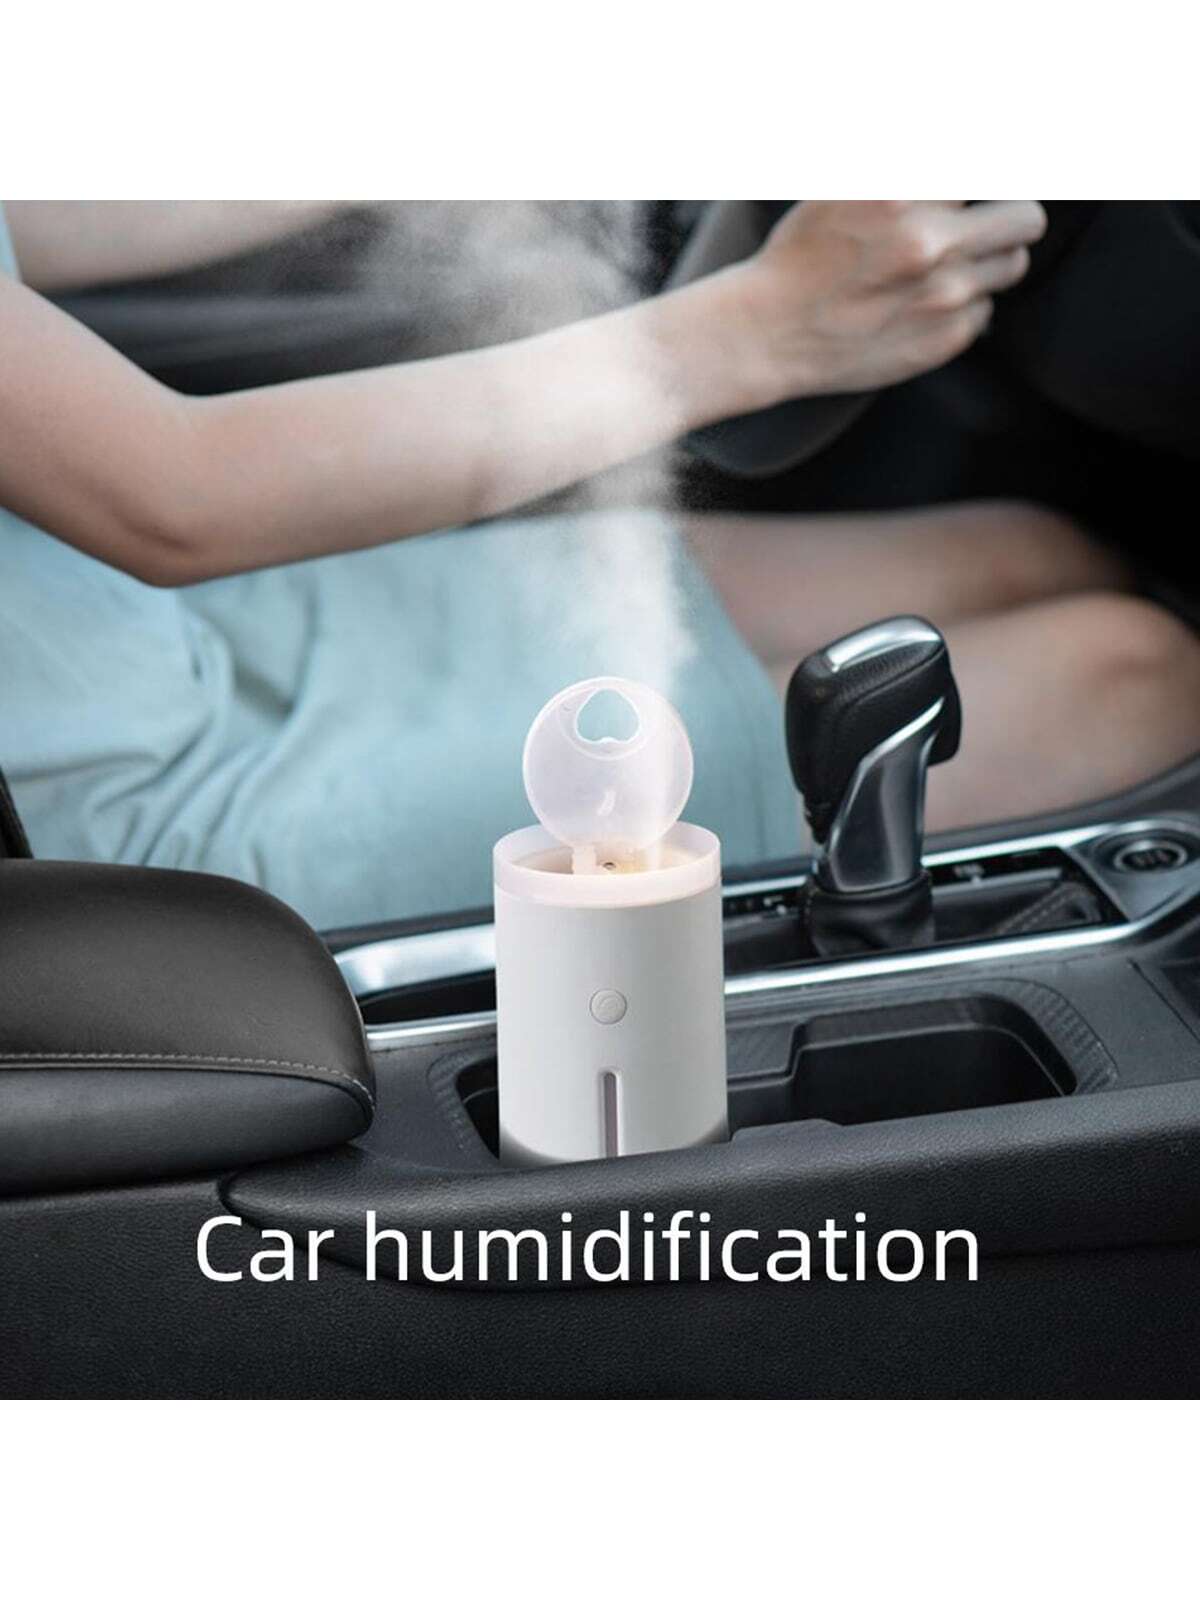 1pc V13 Usb Rechargeable White Color Aroma Humidifier For Home And Car Use, Jellyfish Spray And Direct Spray Modes, 3 Night Light Modes, Suitable For Bedroom Sleep And Car Air Purification-White-2